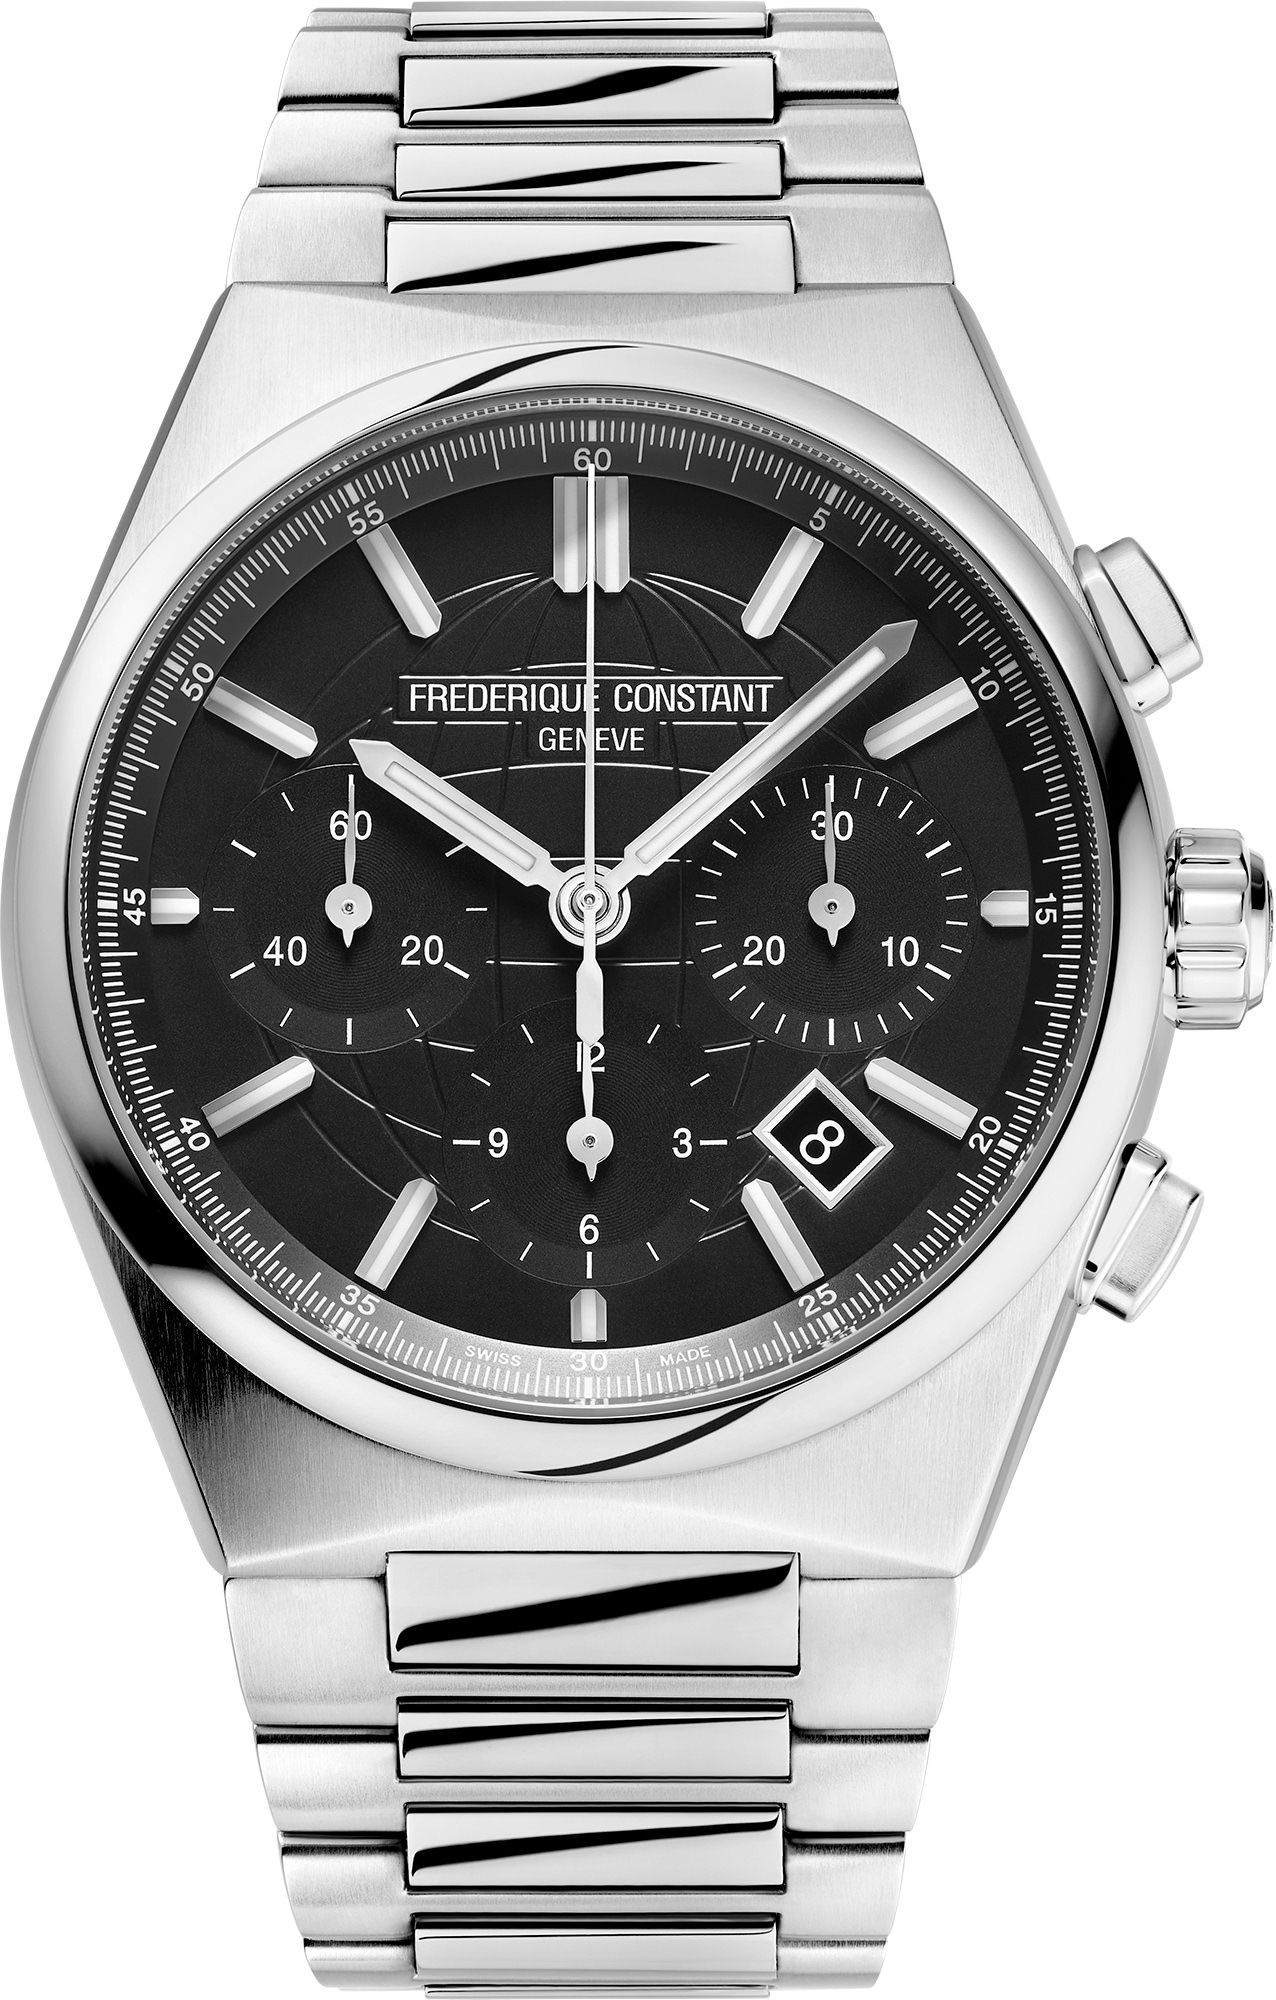 Frederique Constant Highlife Highlife Chronograph Automatic Black Dial 41 mm Automatic Watch For Men - 1